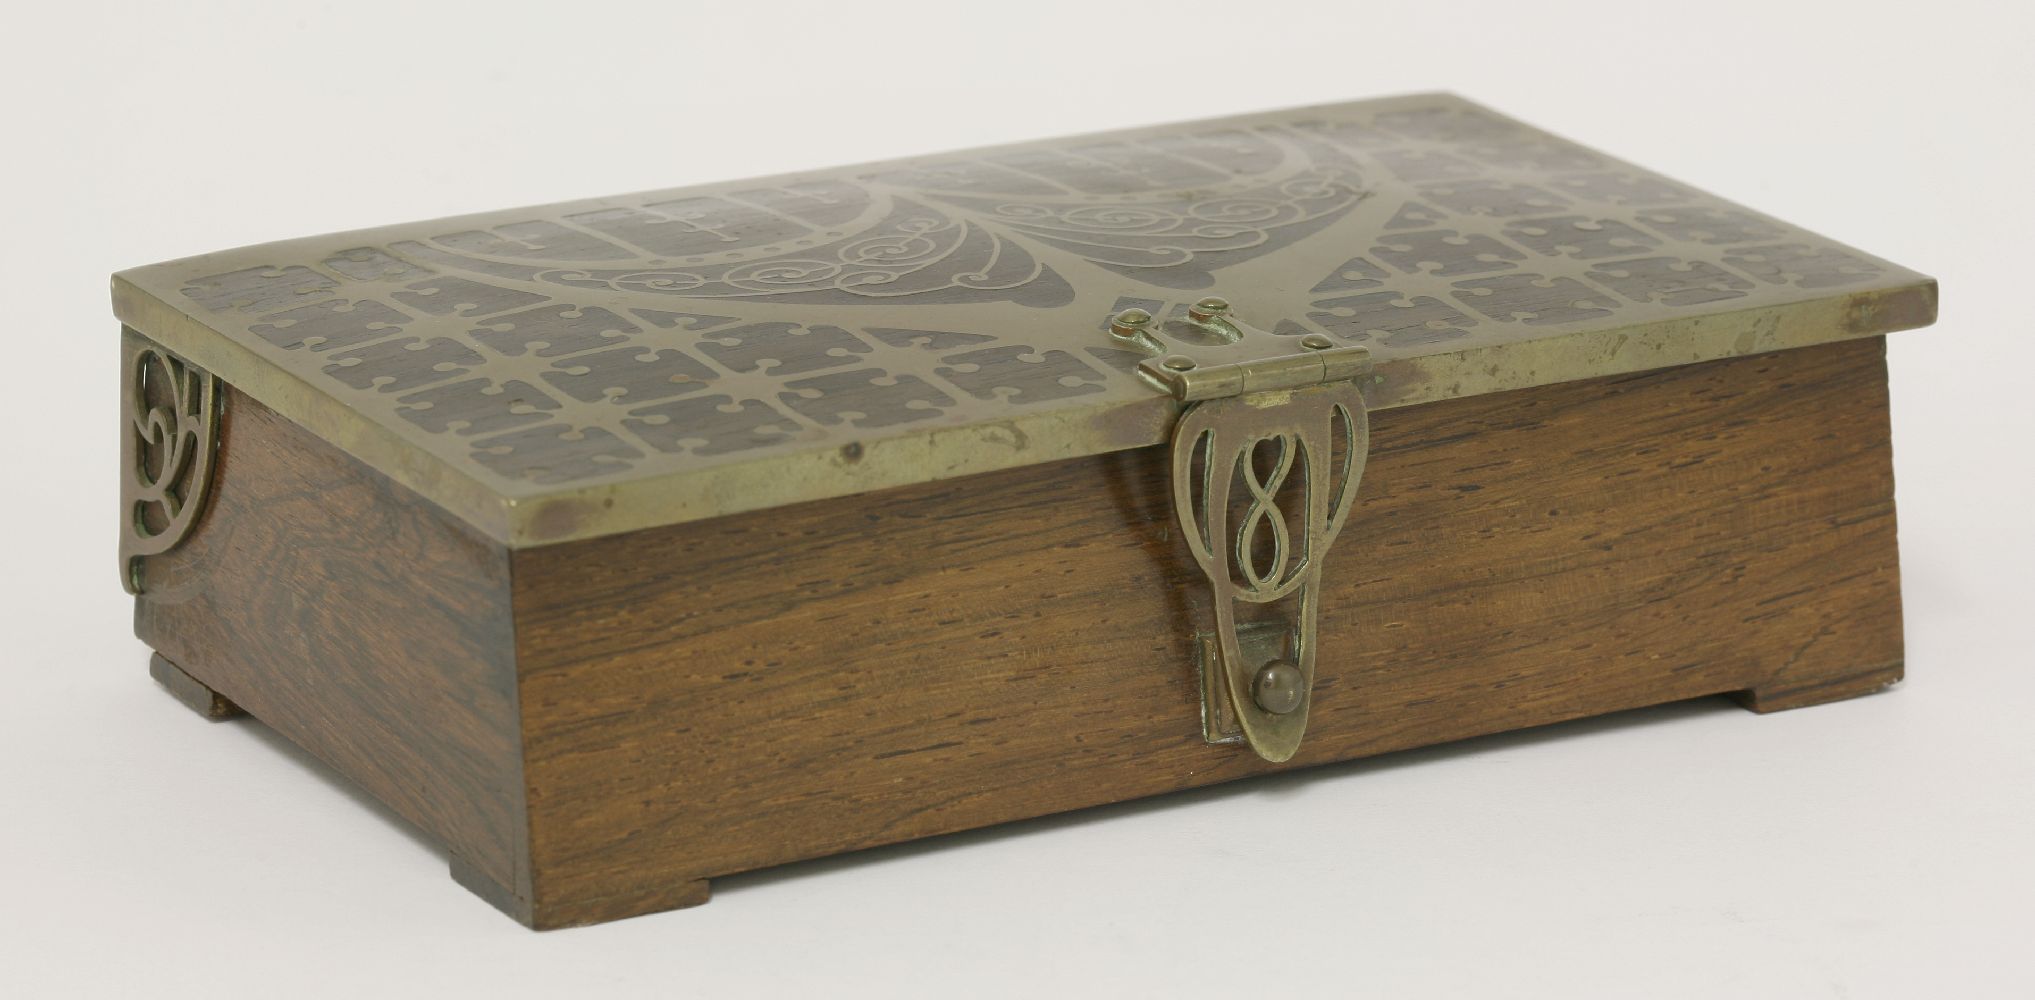 A French Art Nouveau rosewood casket,early 20th century, the cover with ornate brass inlay and